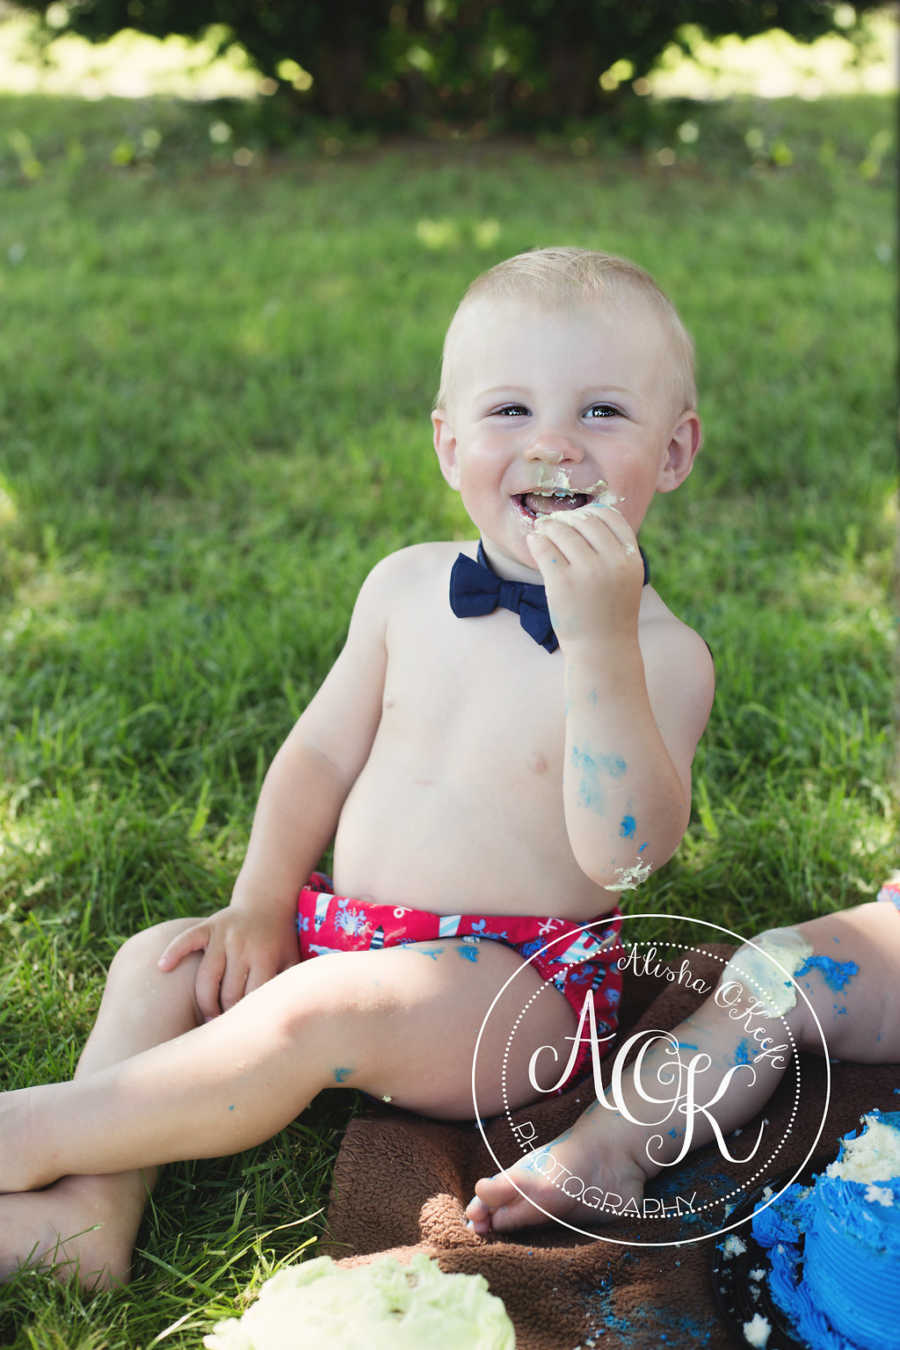 Shirtless infant with bowtie on smiles as he takes a bite of cake with his hand